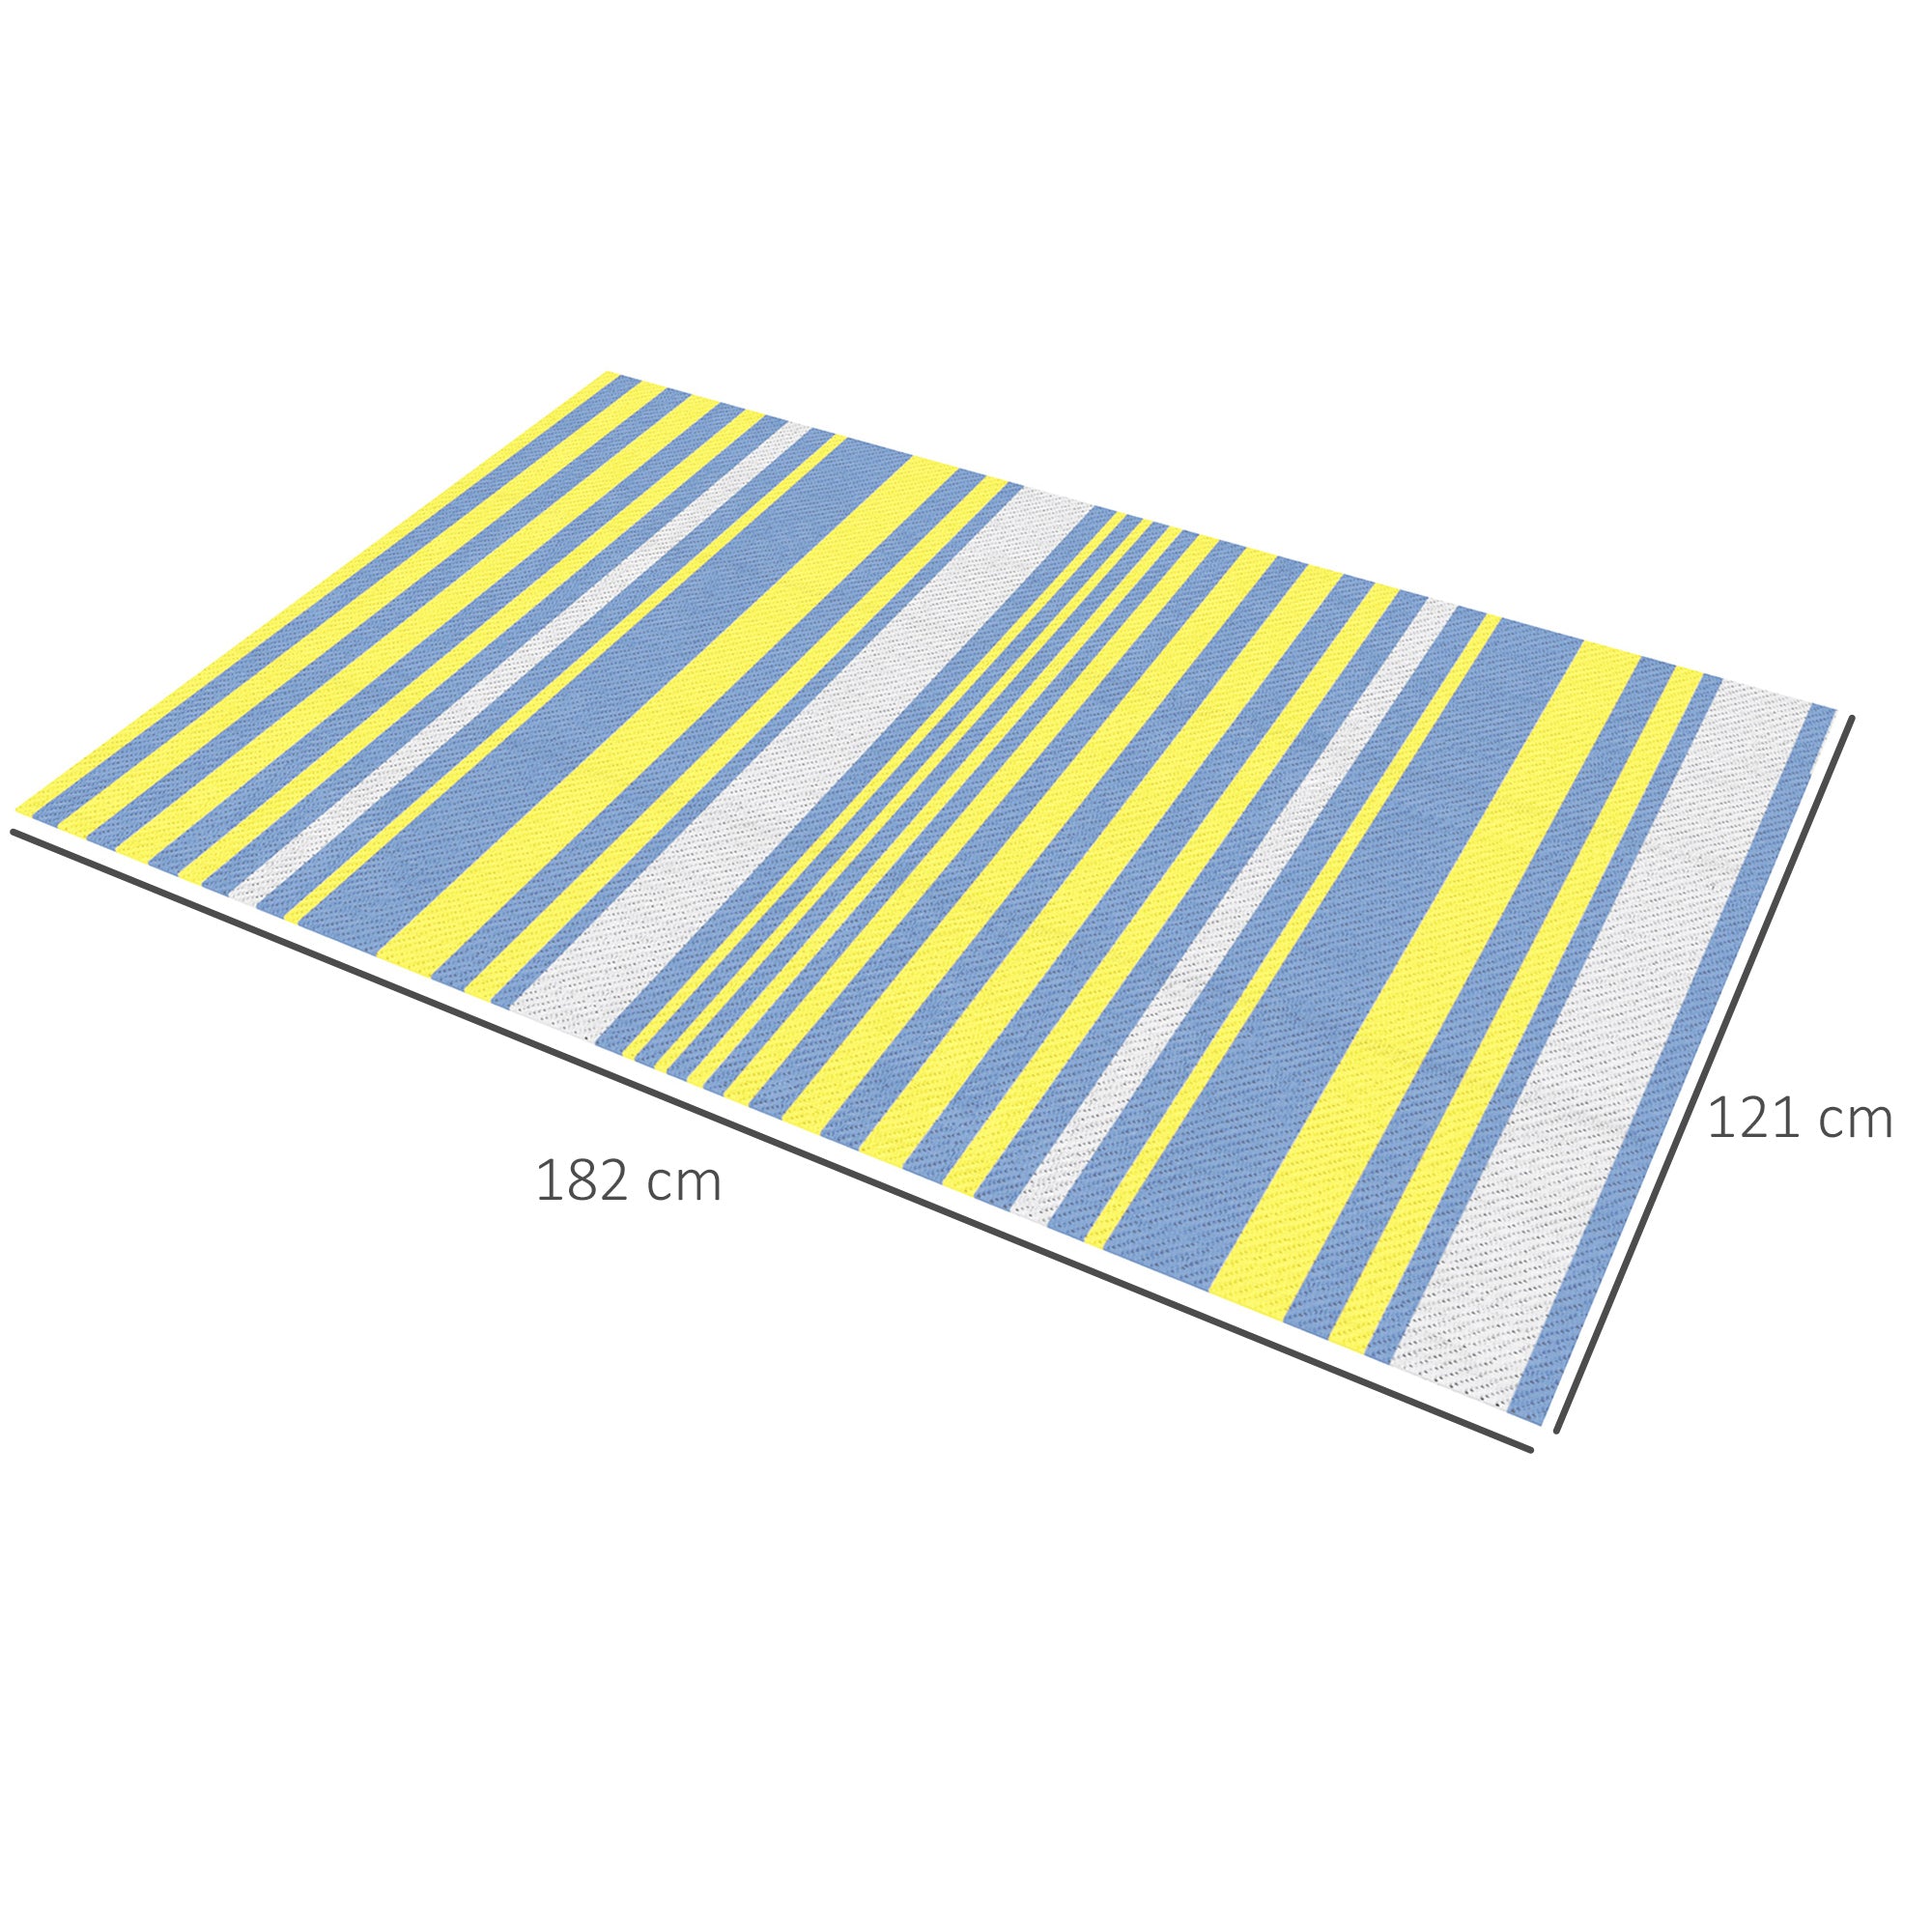 Outsunny Reversible Outdoor Rug, Lightweight Waterproof Plastic Straw Mat for Backyard, Deck, RV, Picnic, Beach, Camping, 121 x 182 cm